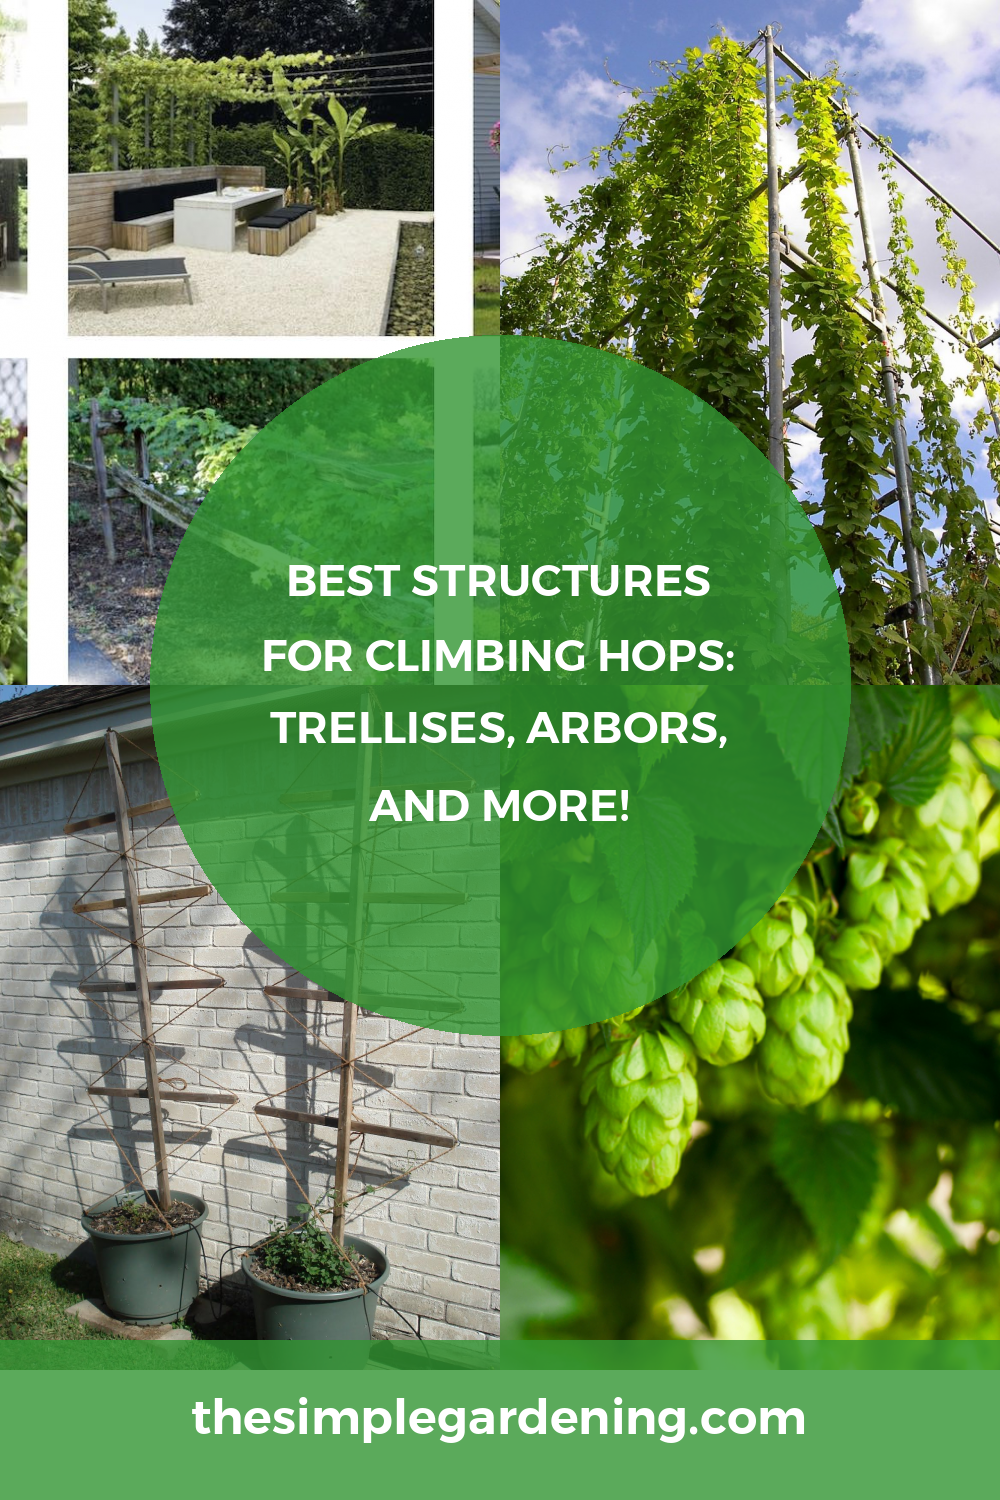 Best Structures for Climbing Hops: Trellises, Arbors, and More!